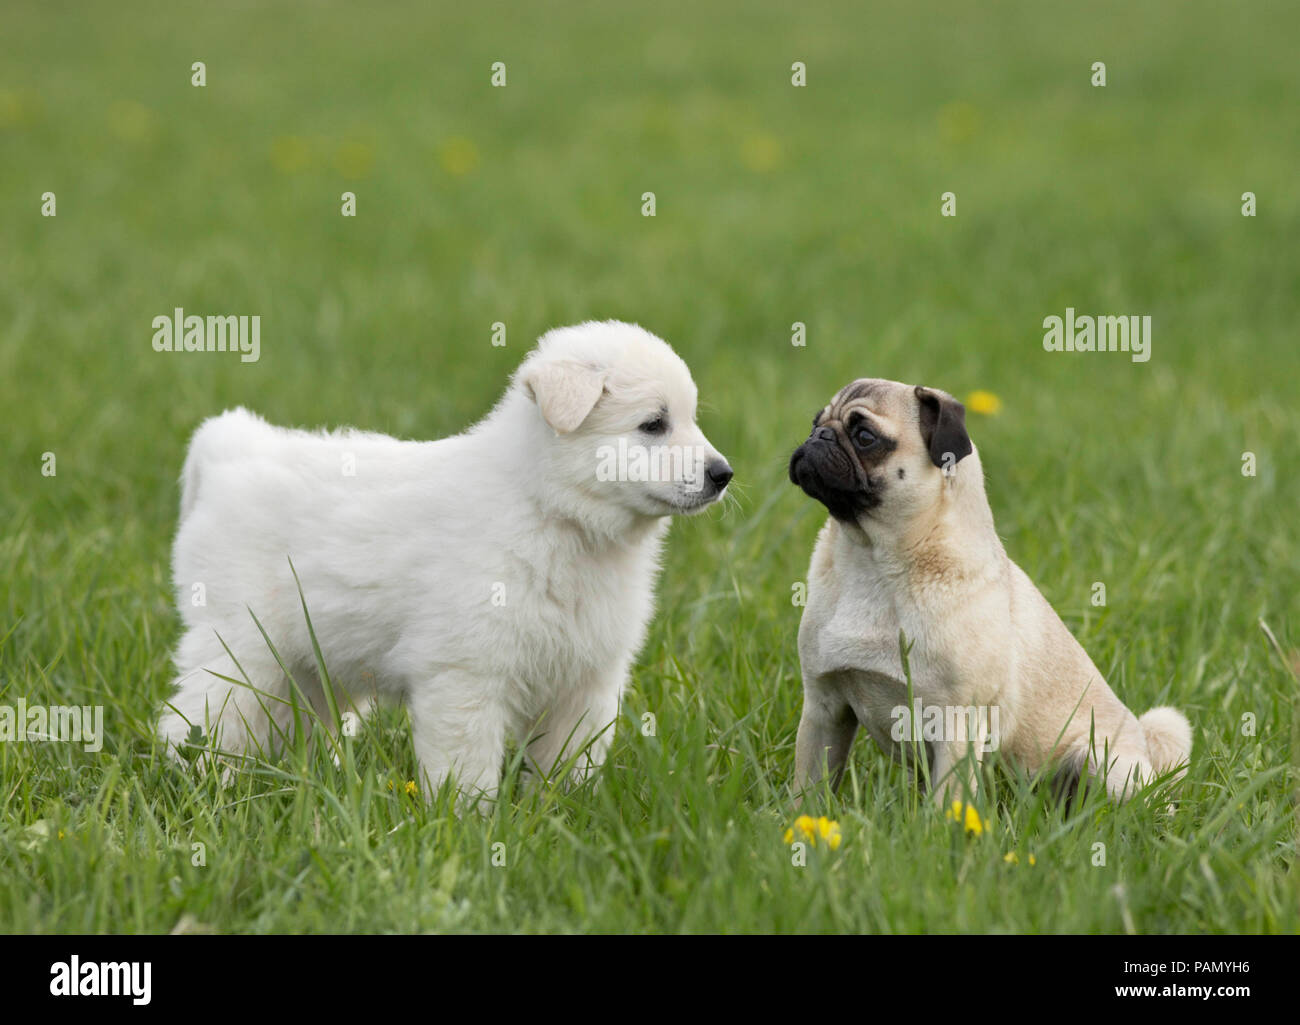 White Swiss Shepherd Dog. Puppy standing next adult pug on a meadow. Germany Stock Photo